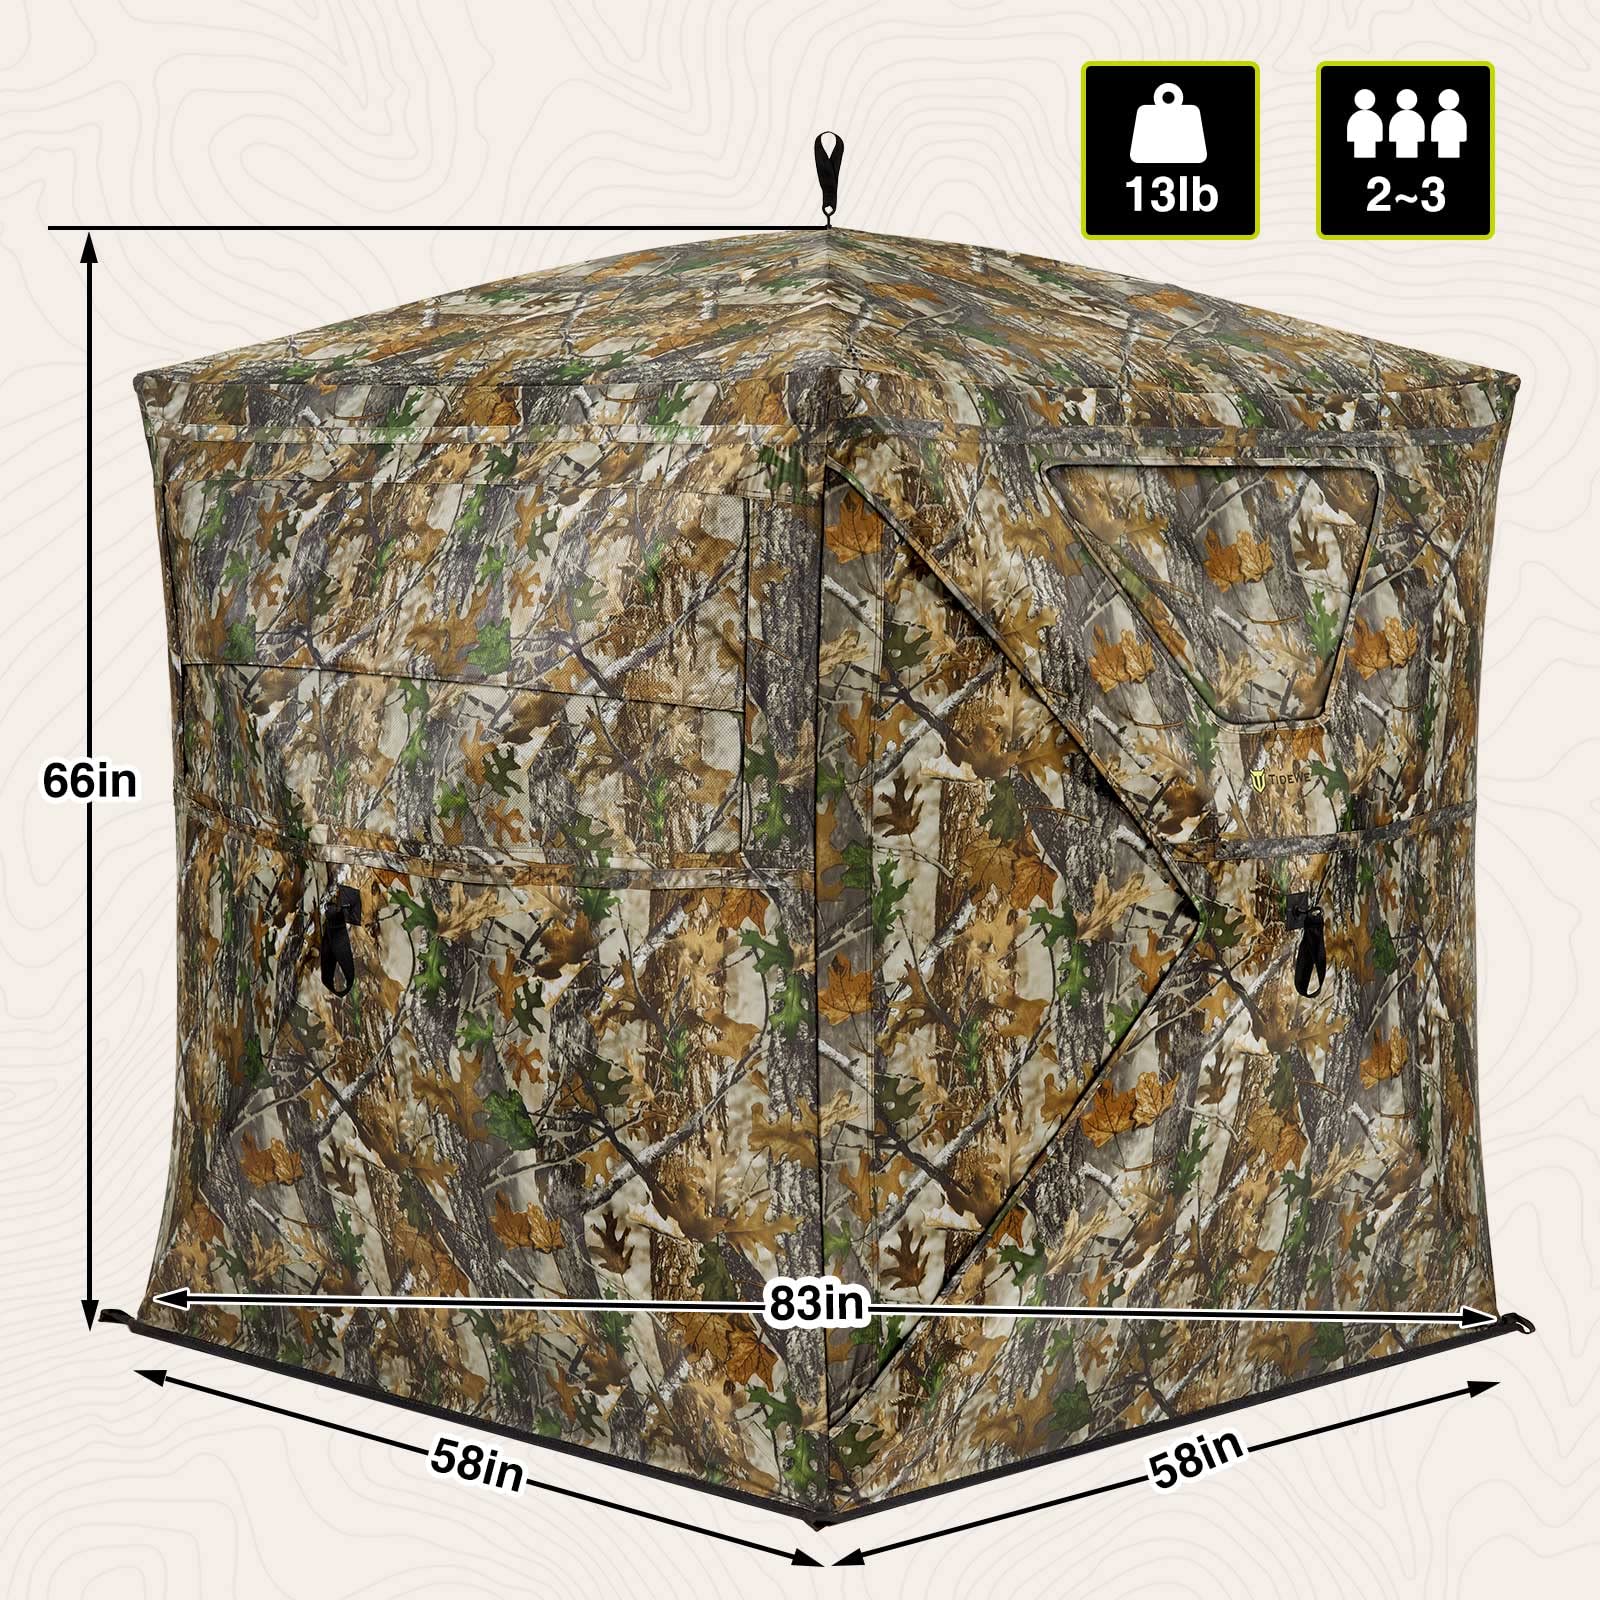 TIDEWE Hunting Blind 270°See Through with Silent Magnetic Door & Sliding Windows, 2-3 Person Pop Up Ground Blind with Carrying Bag, Portable Durable Hunting Tent for Deer & Turkey Hunting